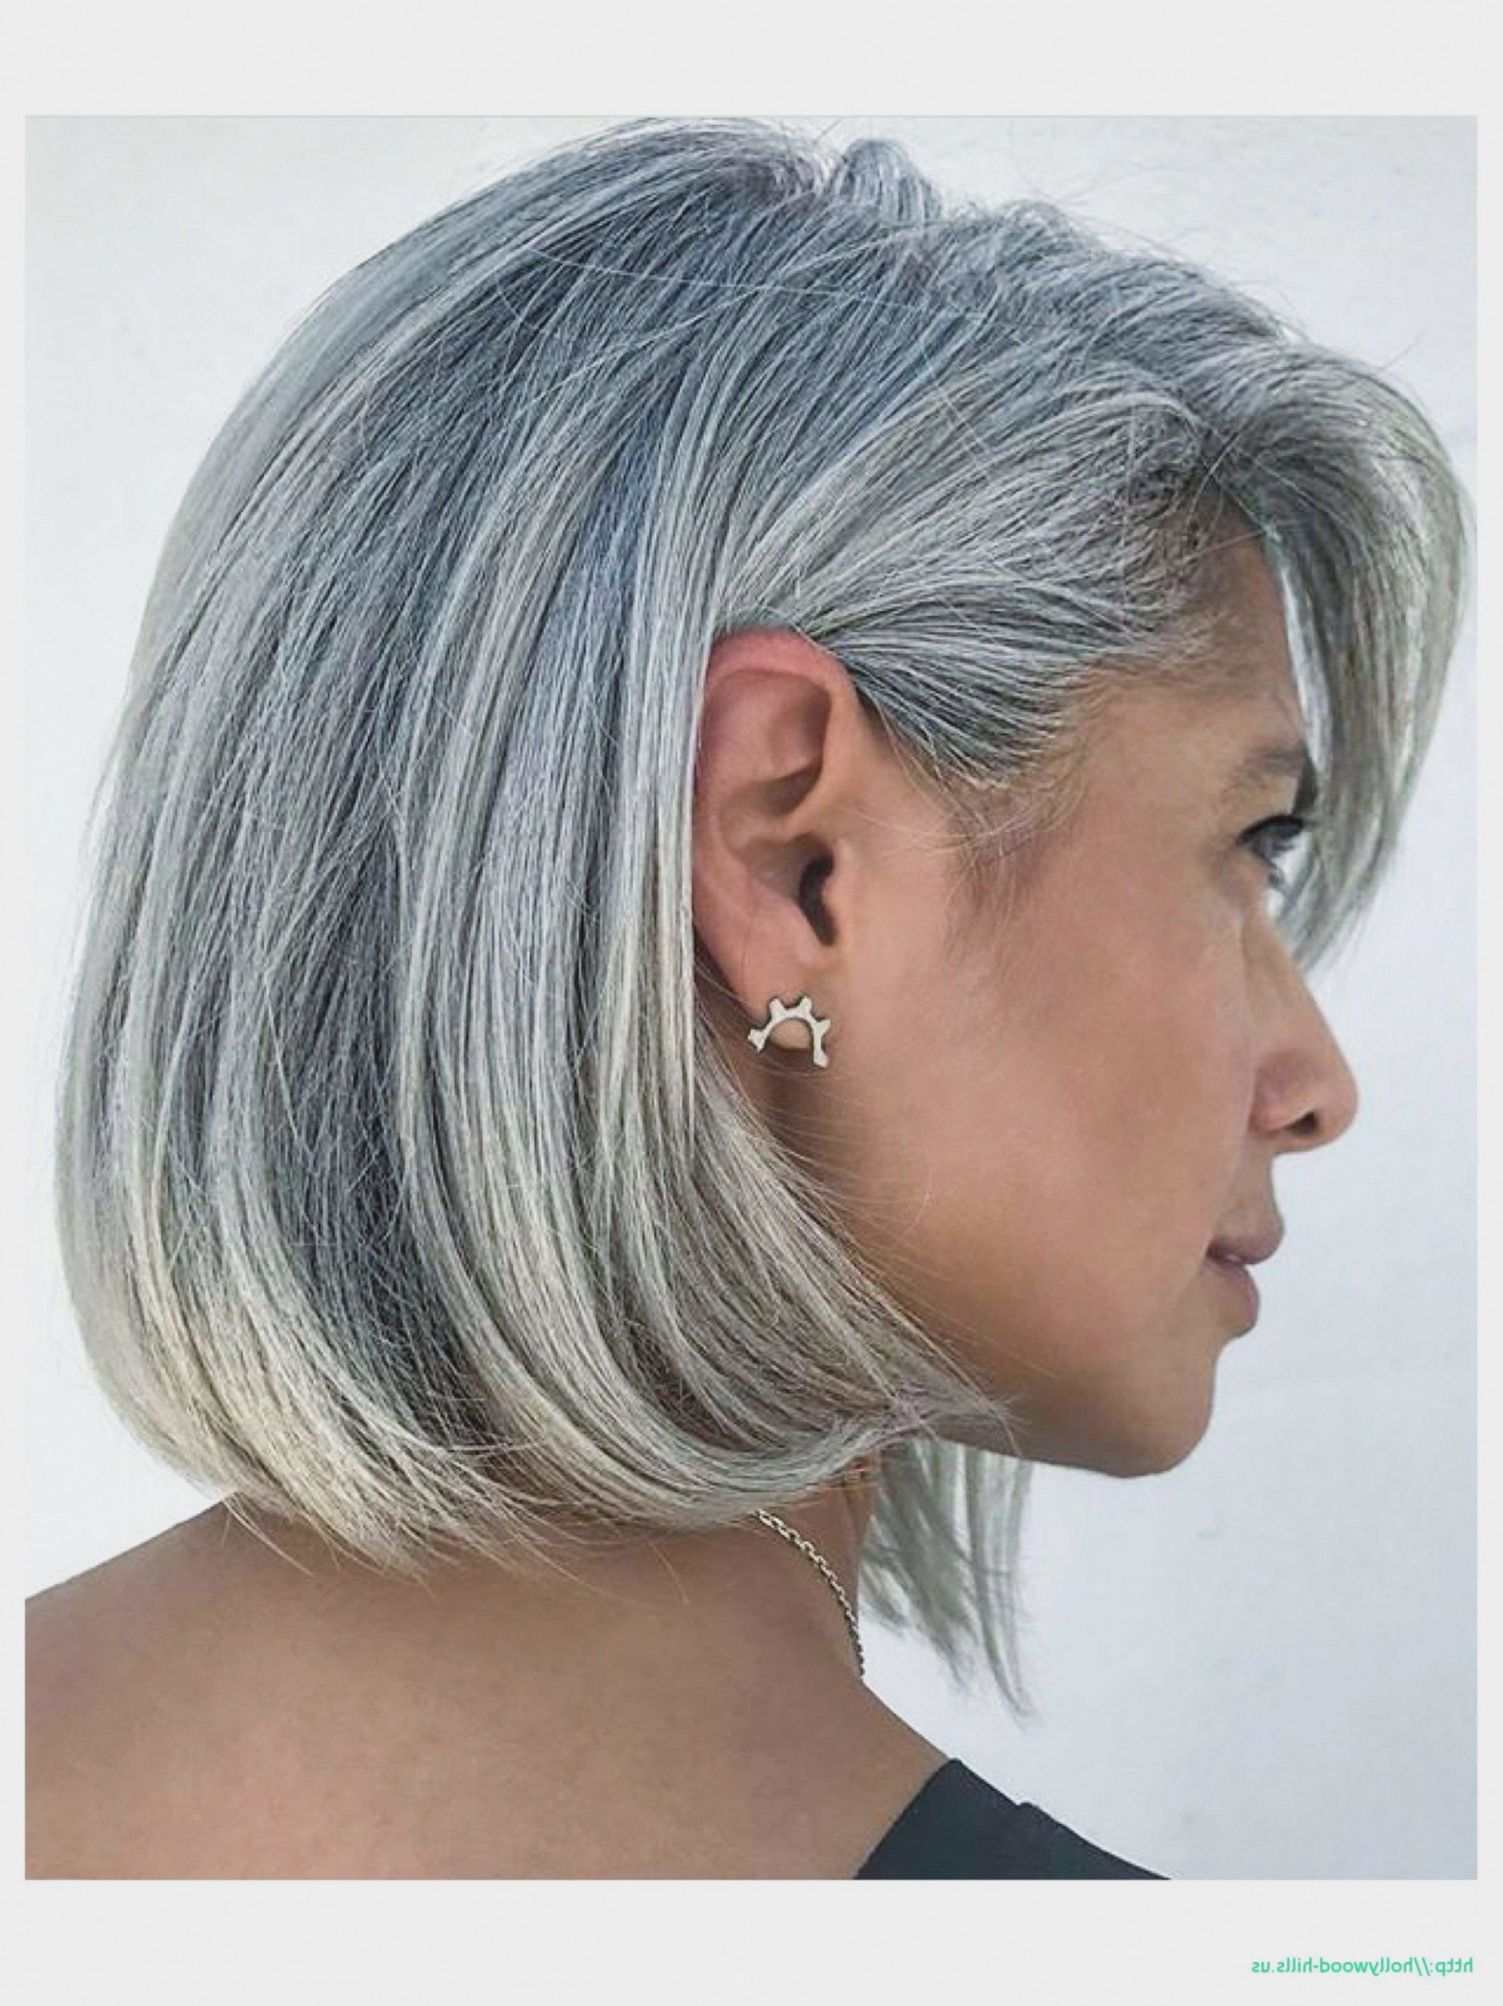 Short Hairstyles For Grey Hair Gallery | Best Hairstyles And Throughout Short Hairstyles For Grey Hair (View 13 of 25)